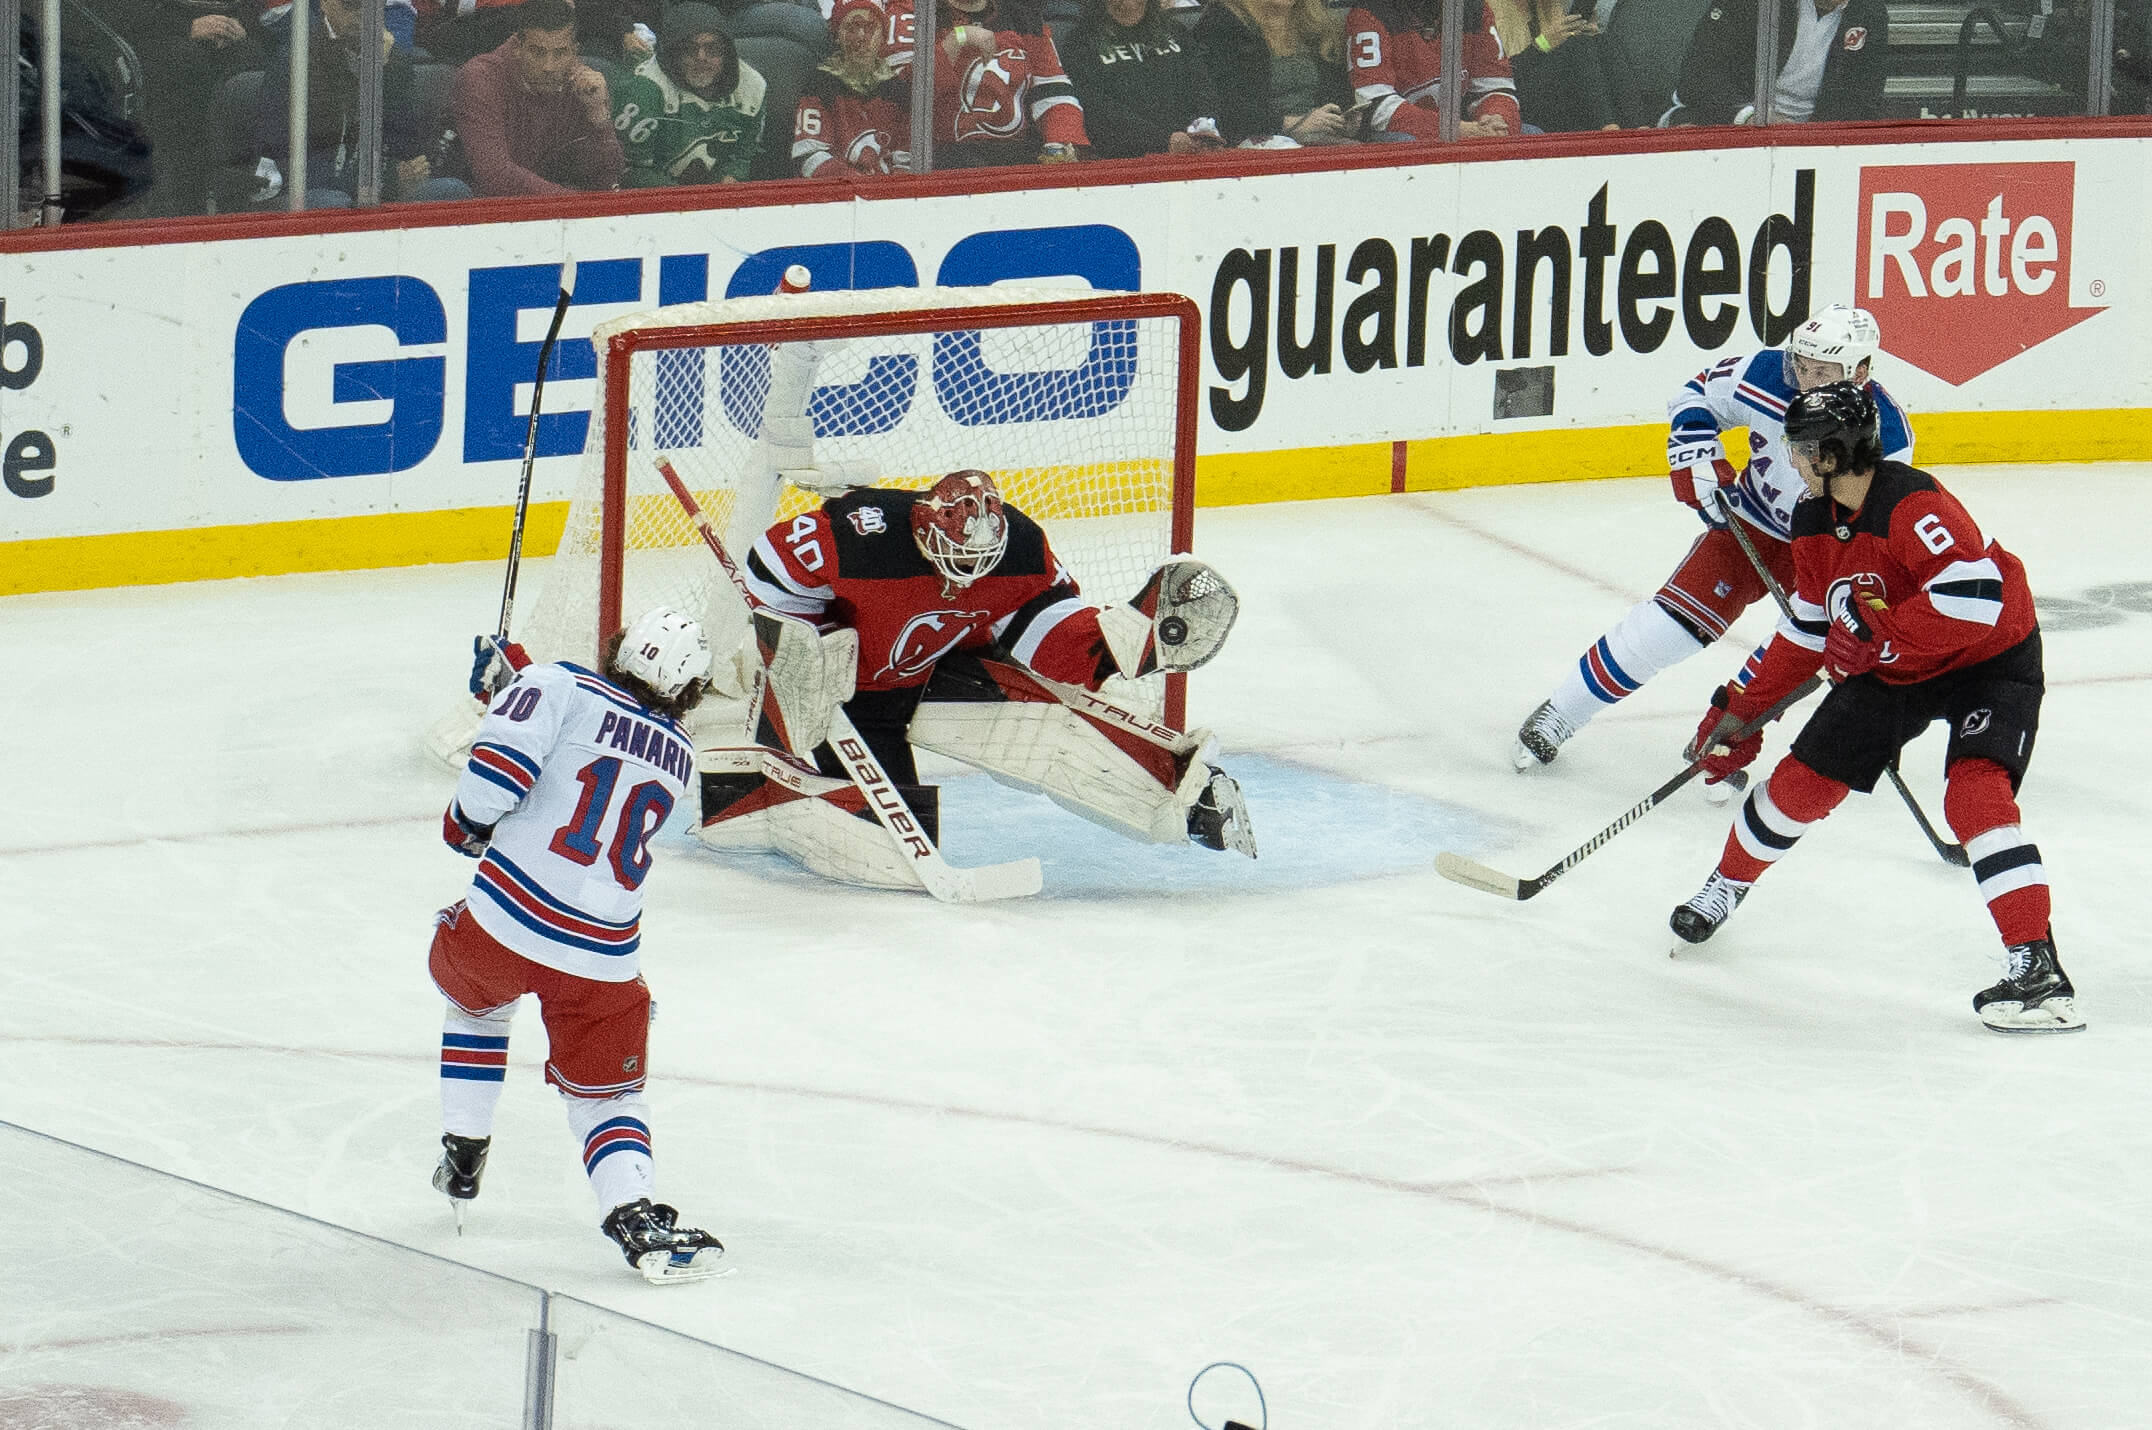 Akira Schmid has Devils back in series with Rangers